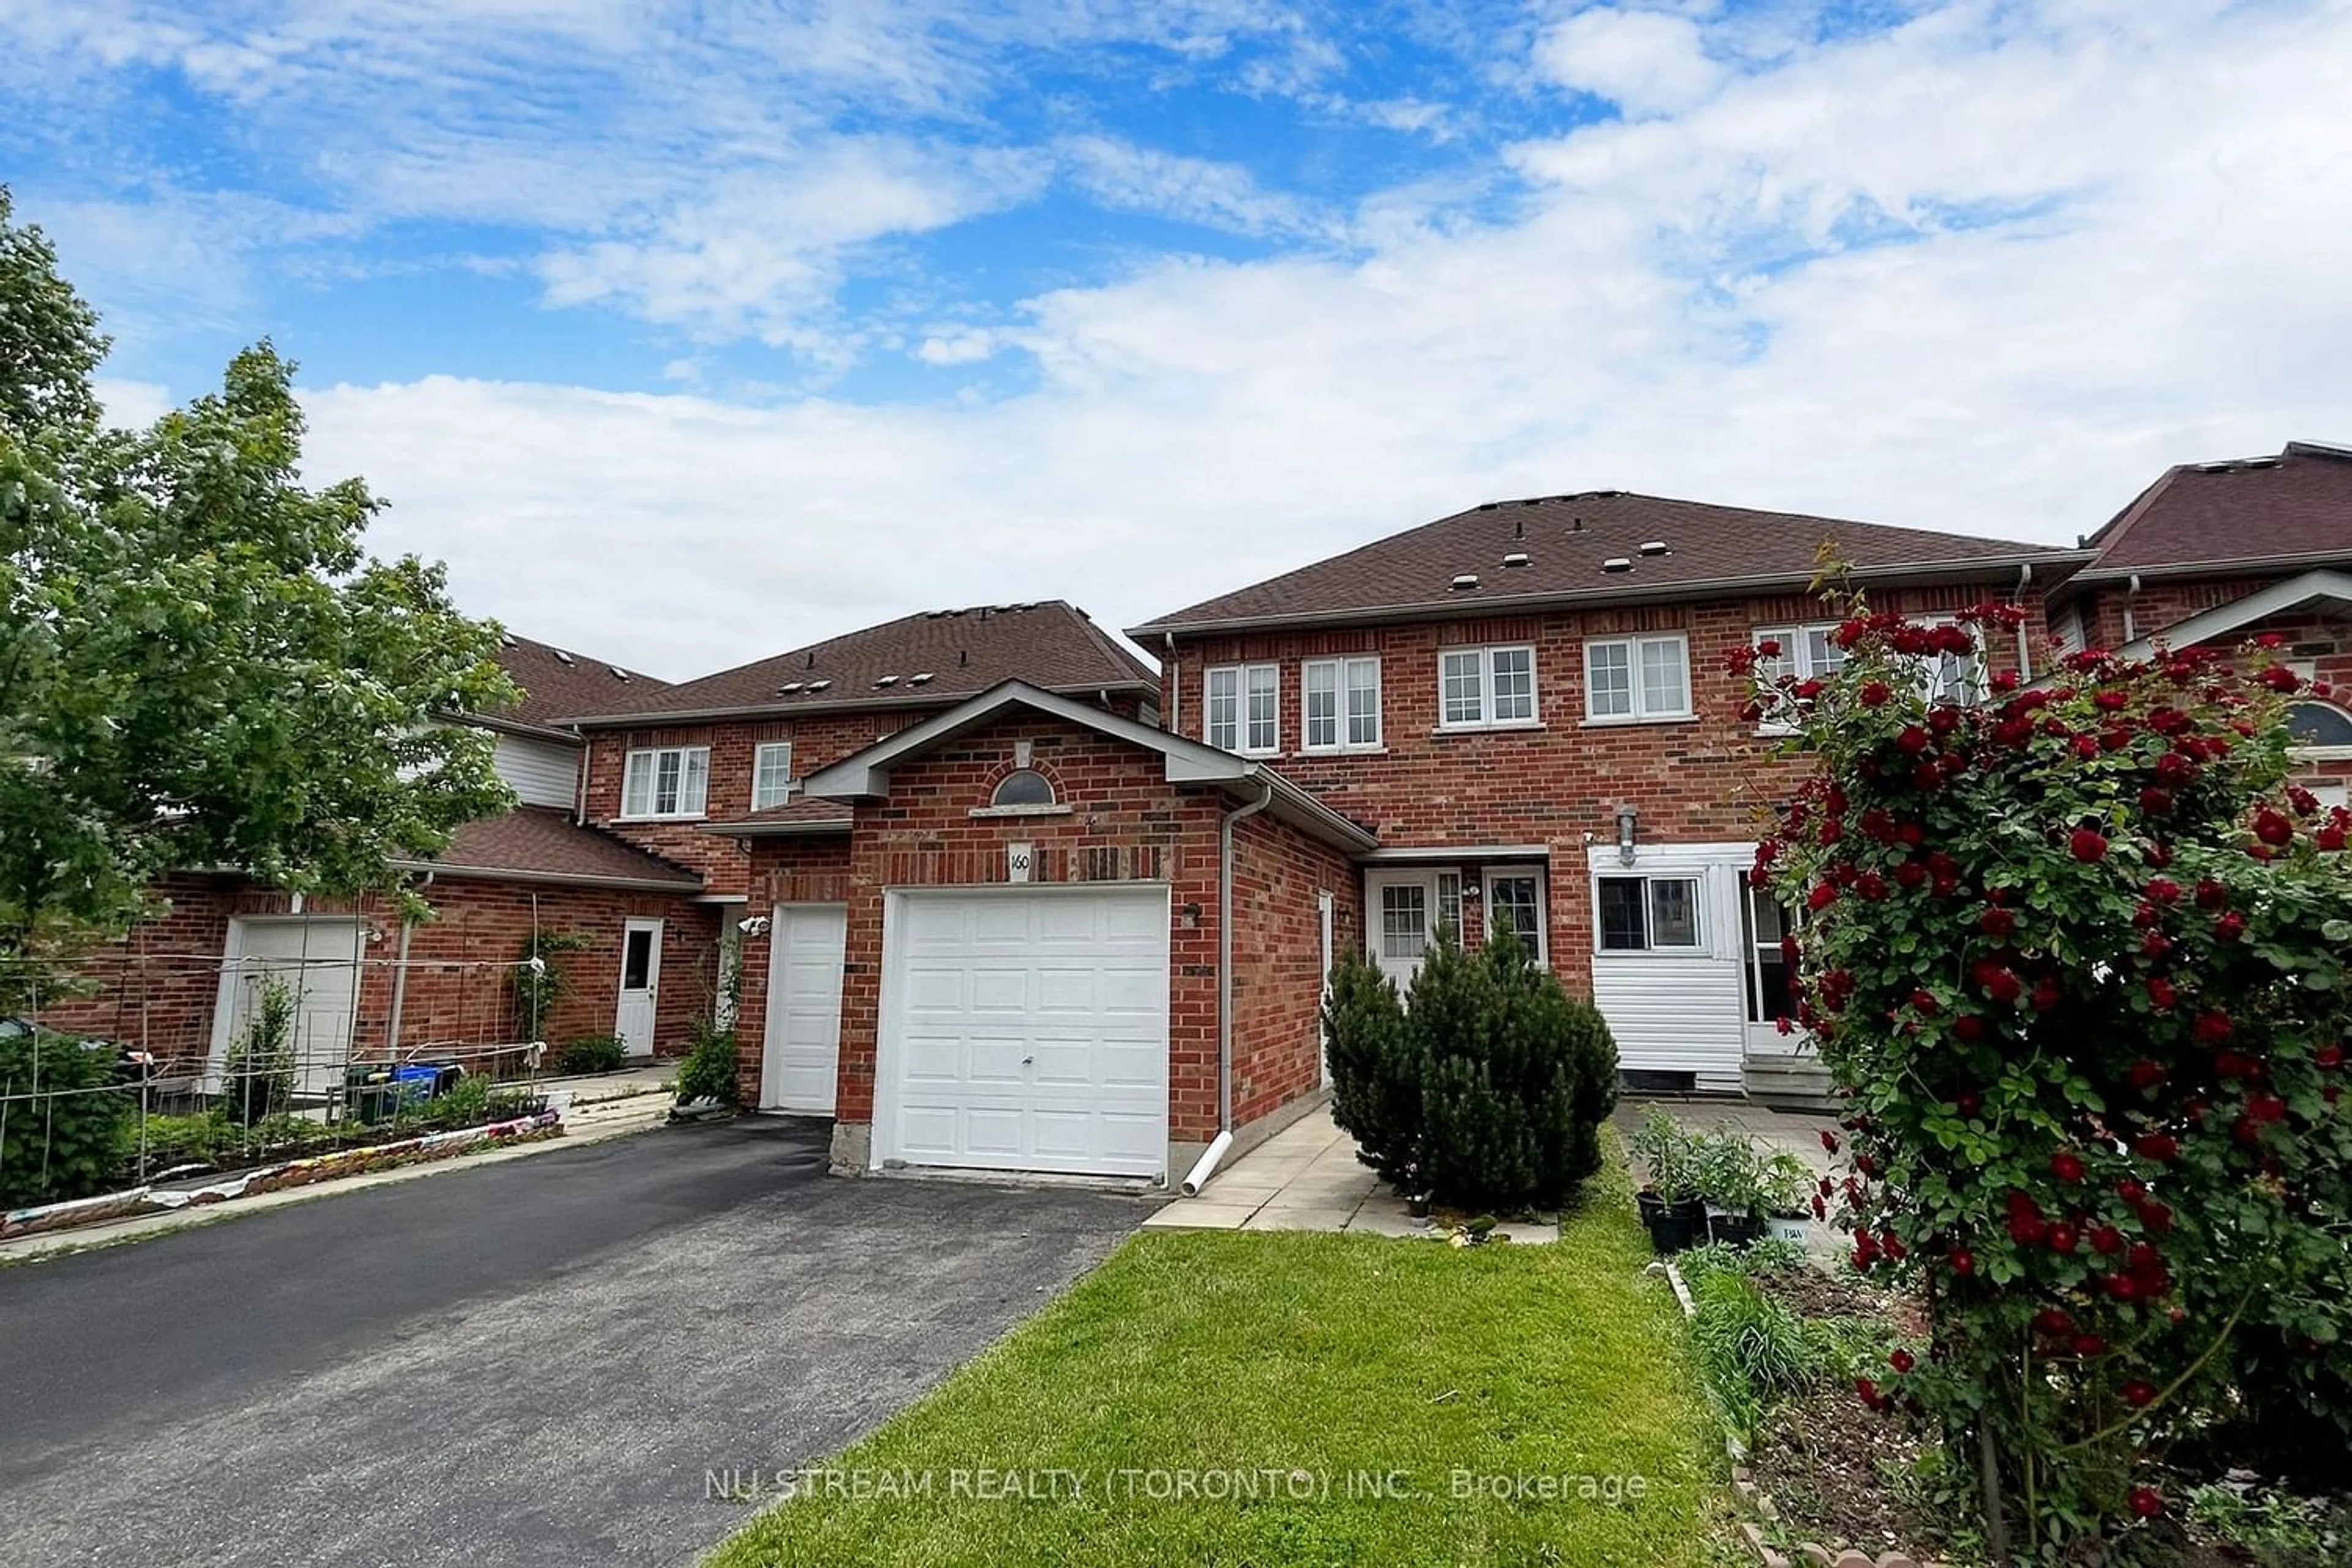 A pic from exterior of the house or condo for 160 South Unionville Ave, Markham Ontario L3R 5X6